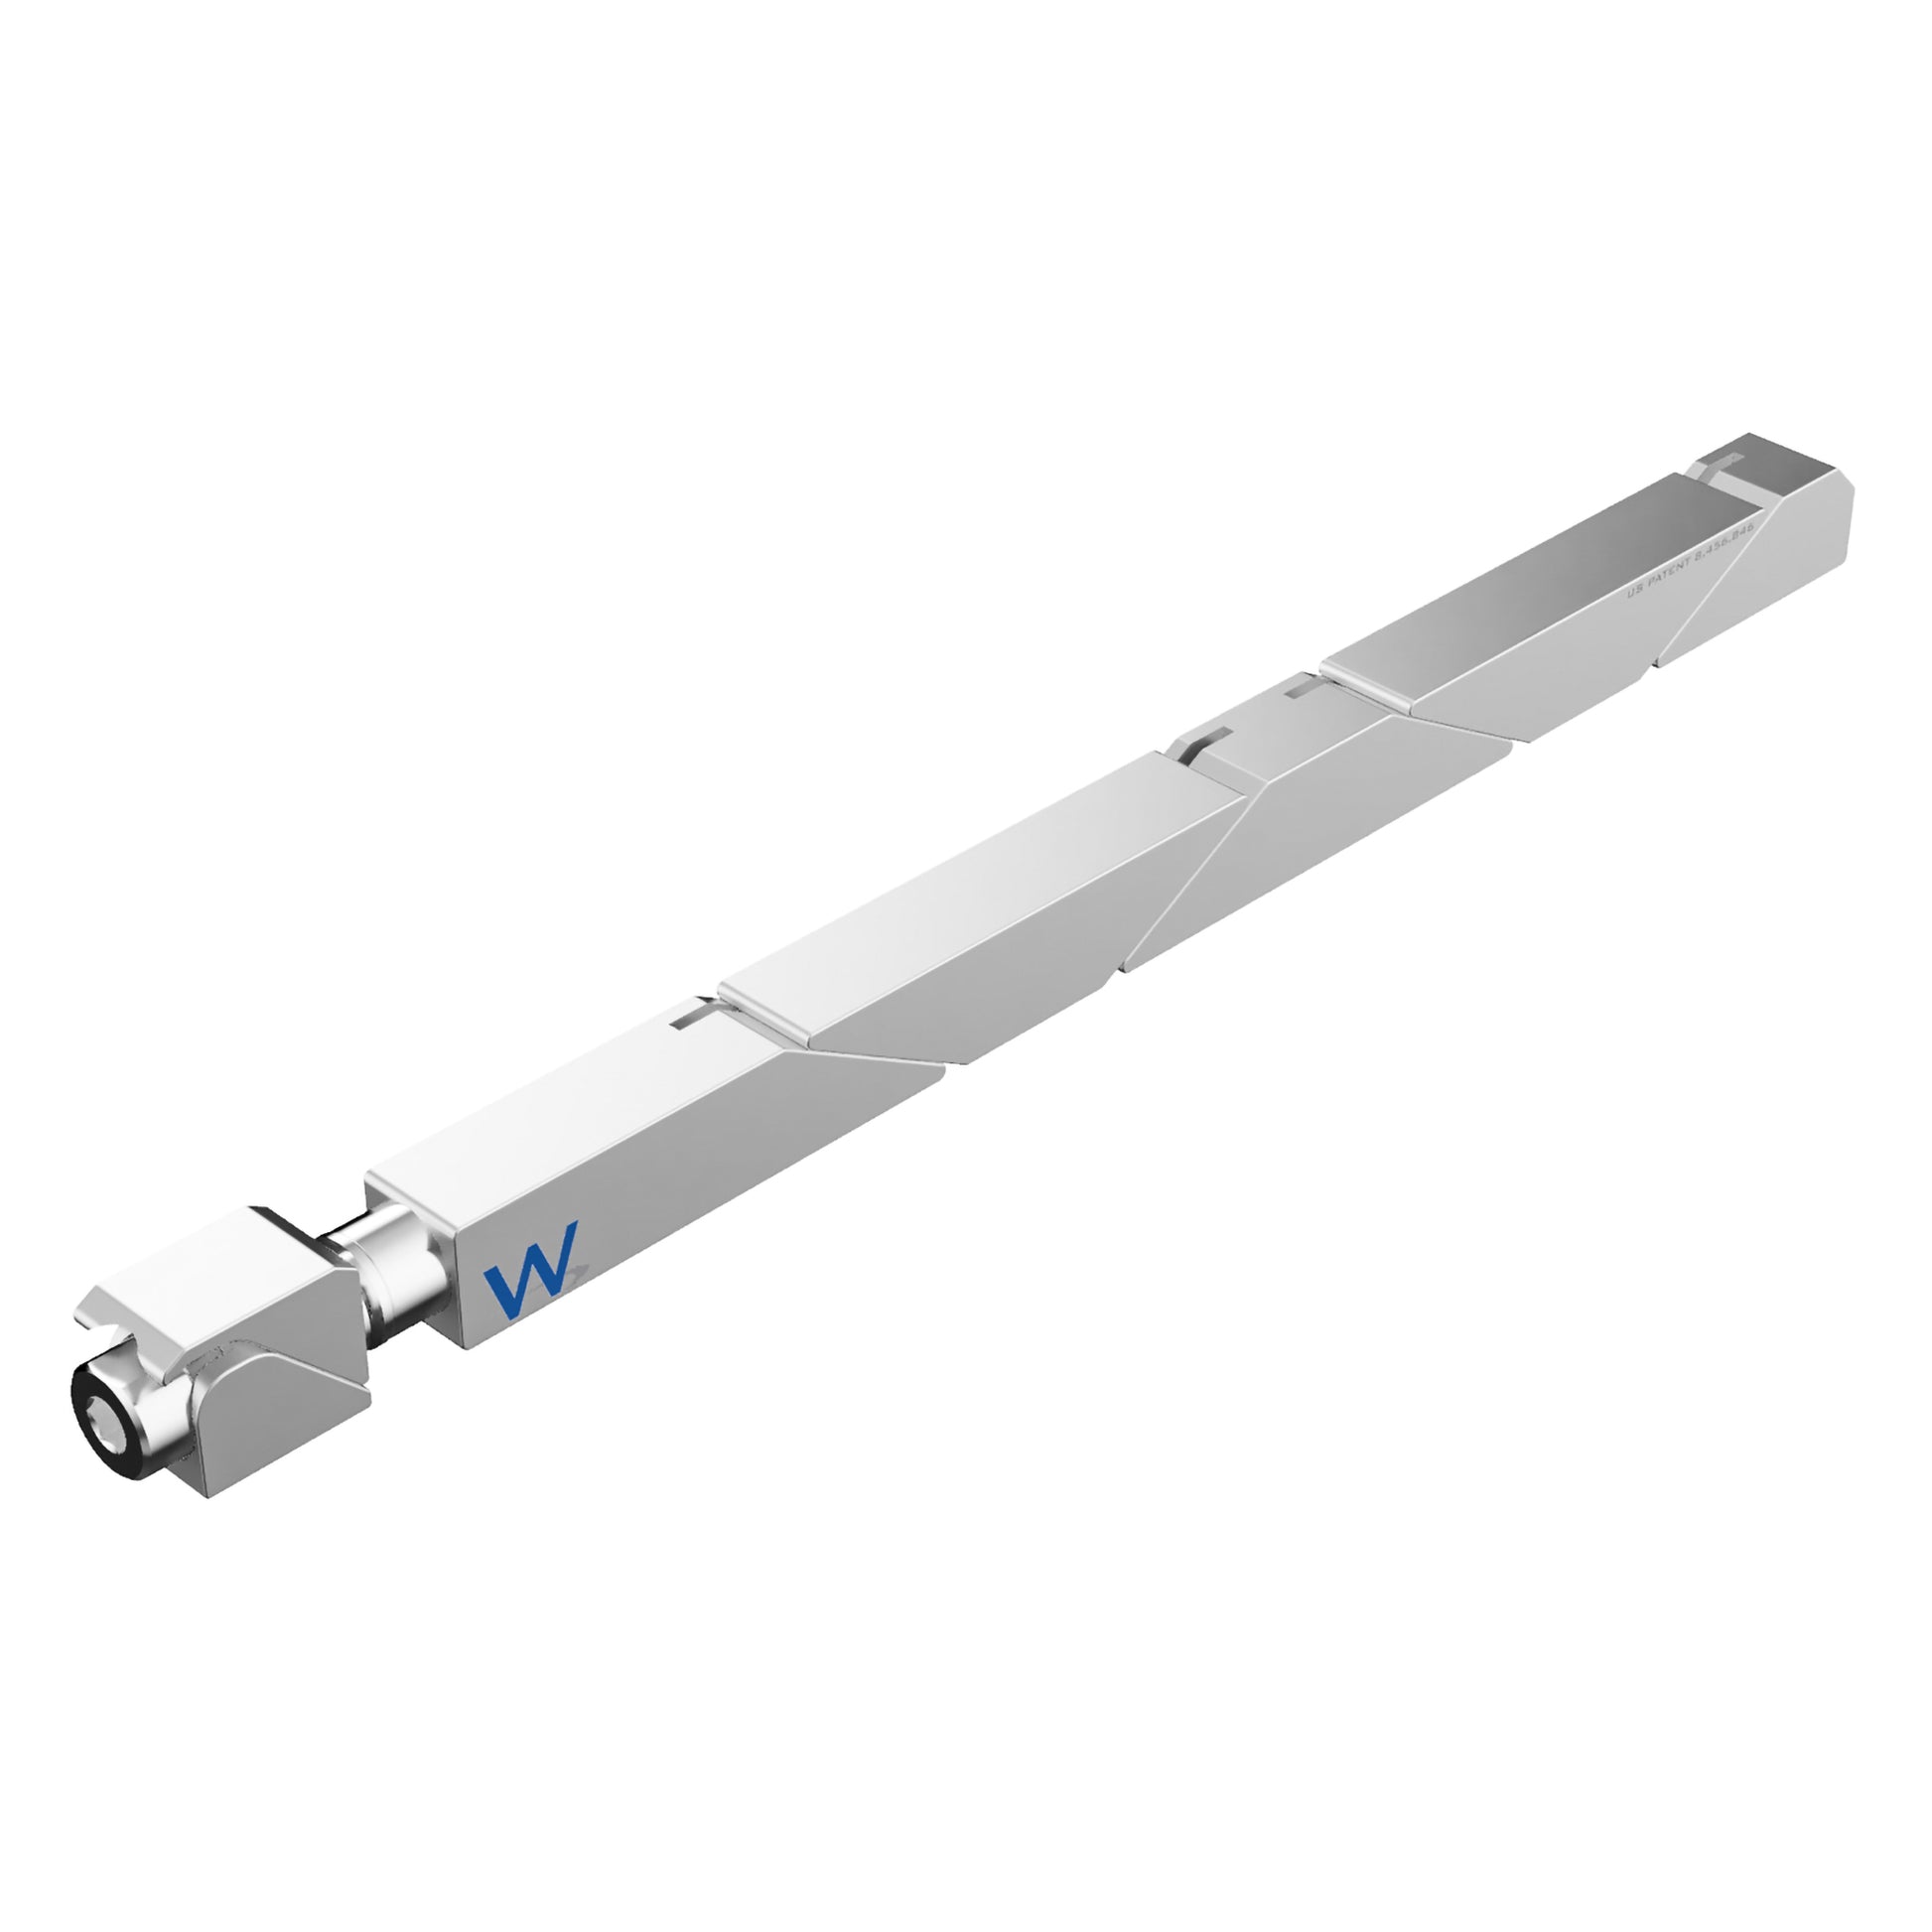 SW7-43-270-250 Max Force Wedgelock, segmented long rectulangular hardware component, Clear Chemical Film Finish